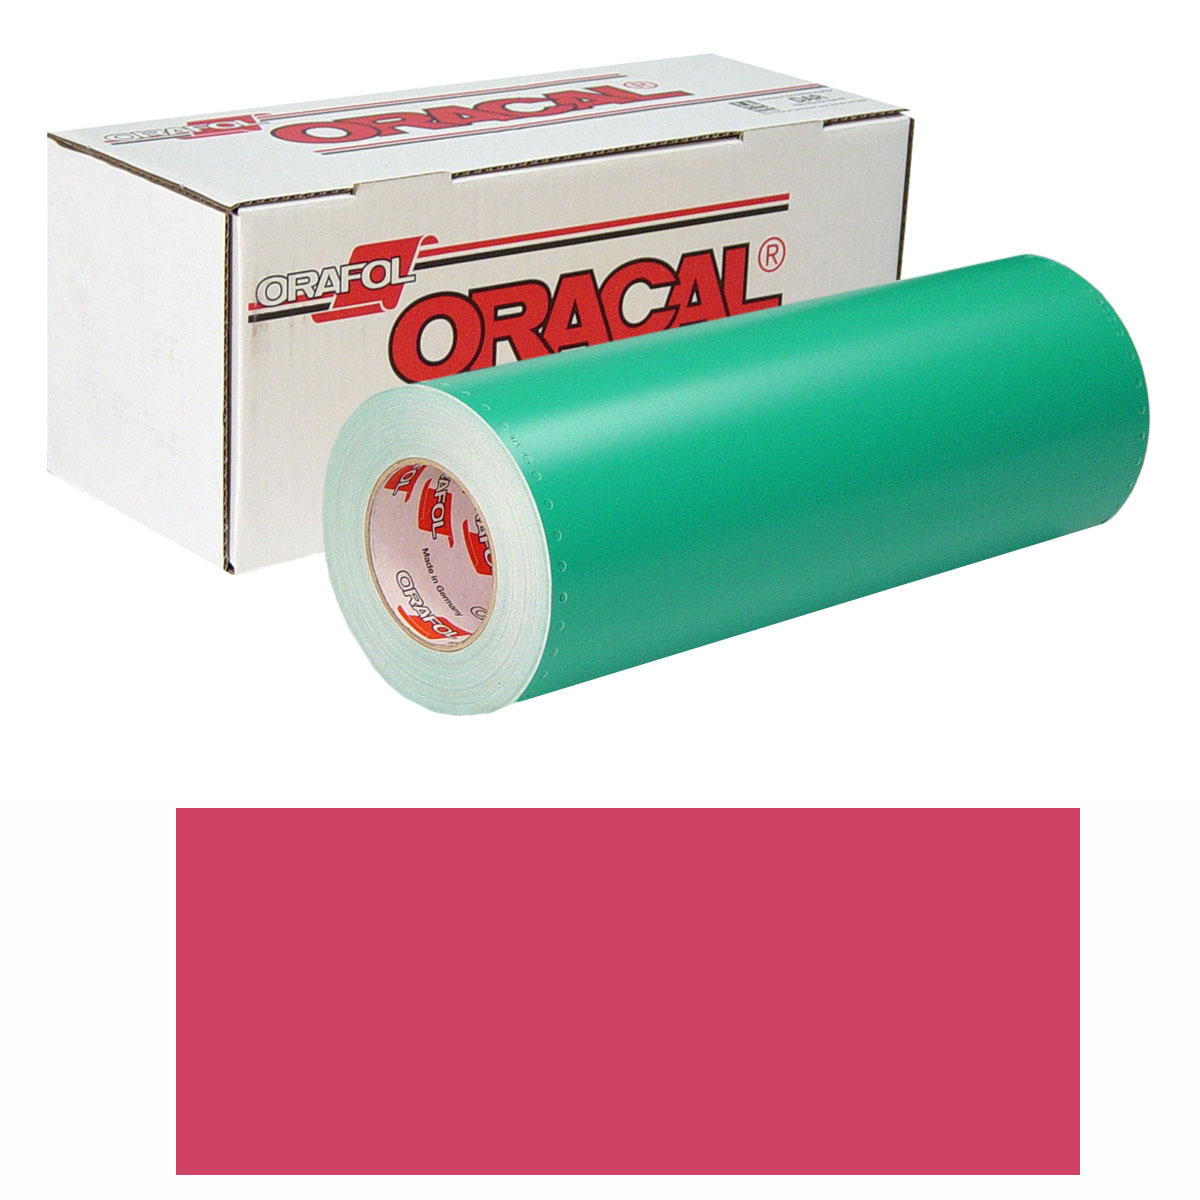 ORACAL 8500 15in X 50yd 017 Cherry Red